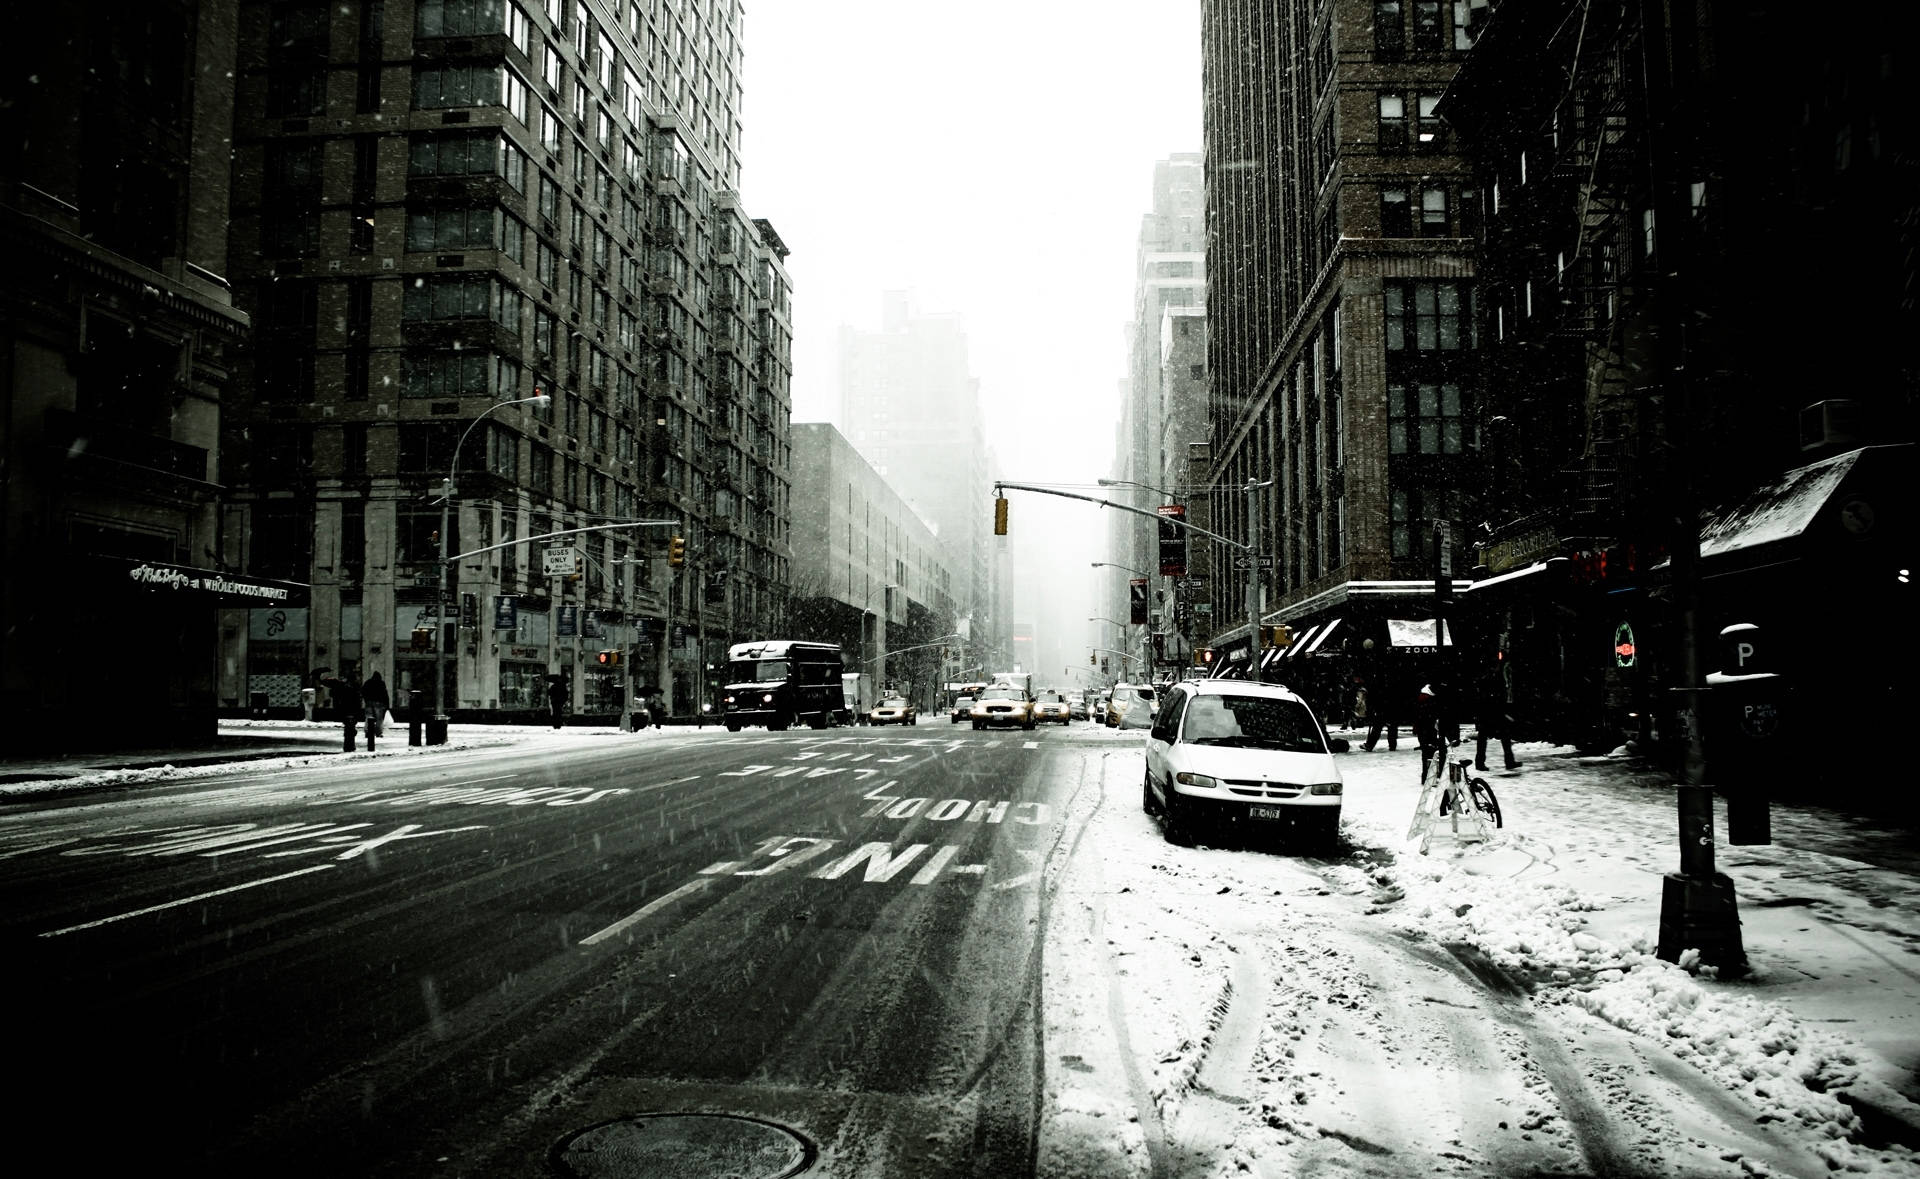 Download Snowing New York Black And White Wallpaper 